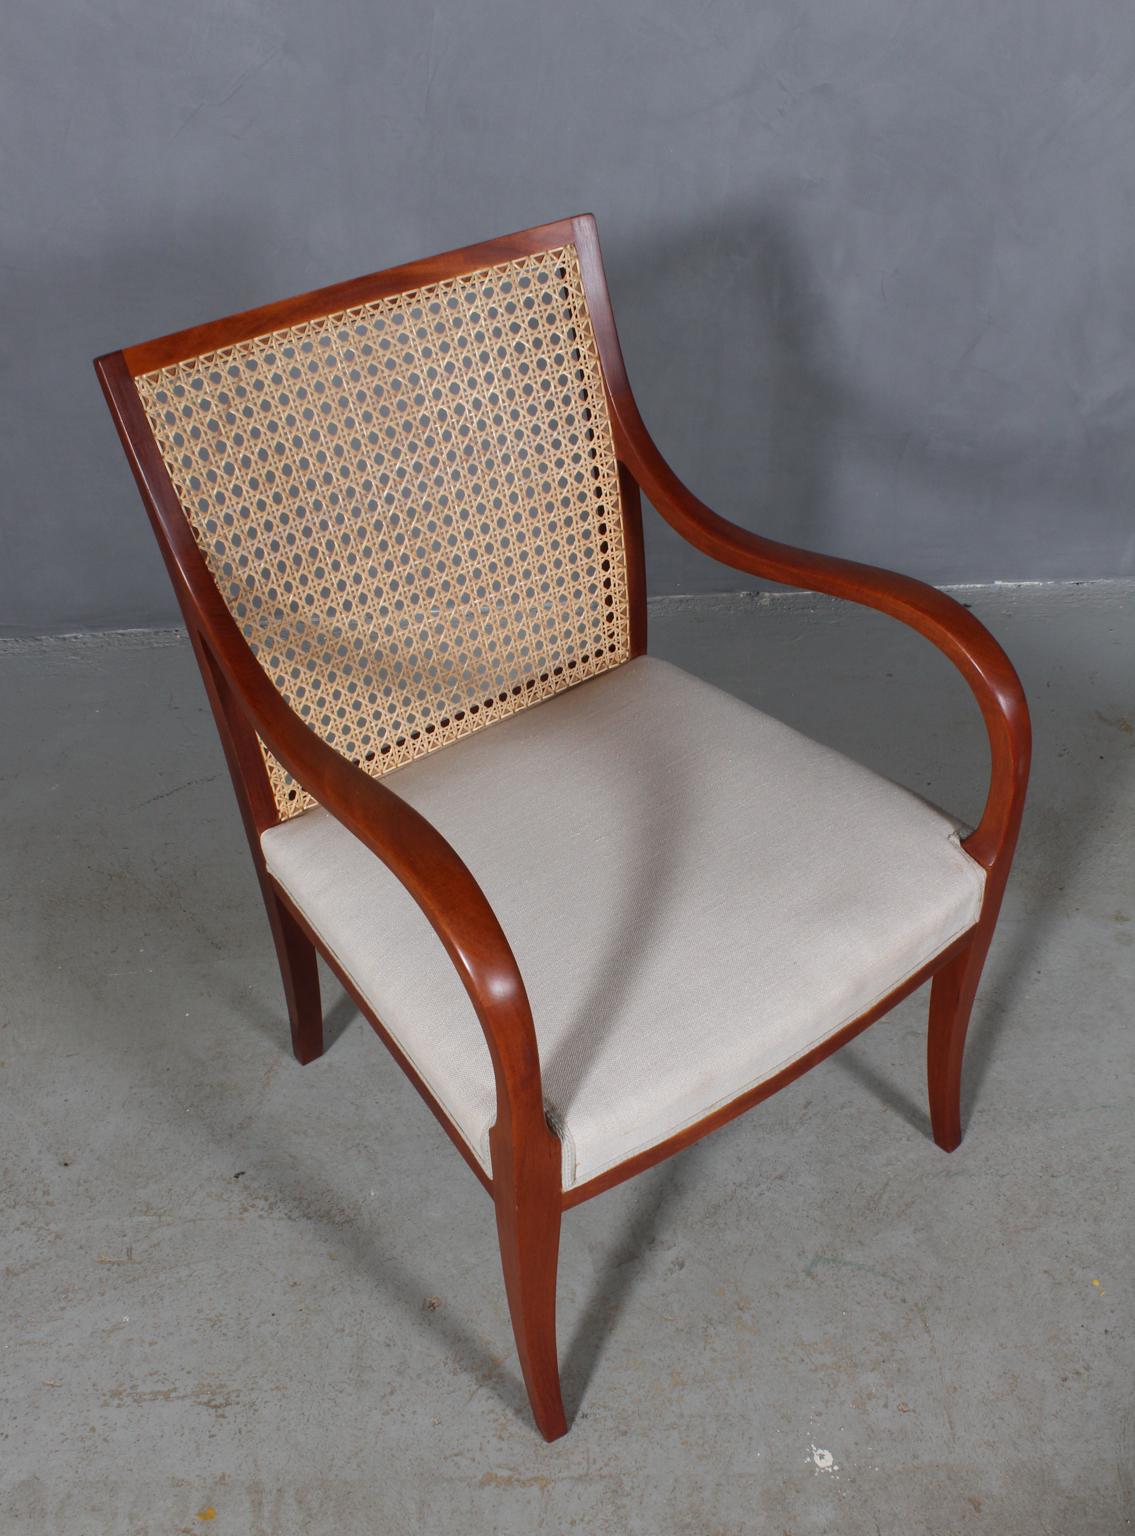 Frits Henningsen armchair. Frame of solid Cuba mahogany. Back with cane.

Seat later upholstered with light wool.

Designed in the 1930s, made by Frits Henningsen.
 